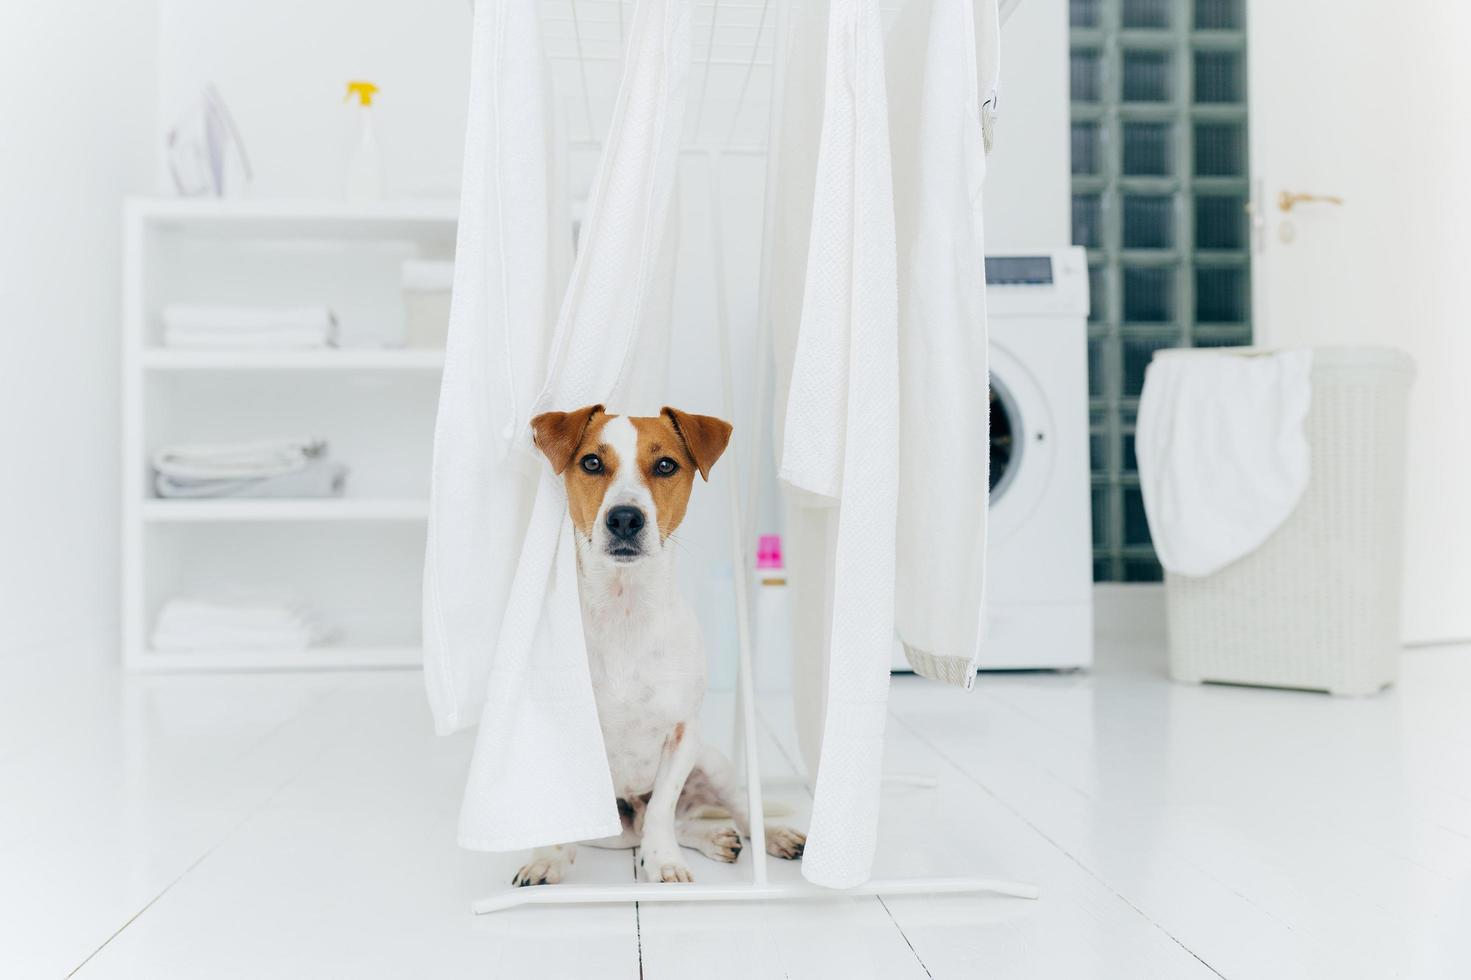 Jack russell terrier dog poses between white towels hanging on clothes dryer in washing room. Washer and laundry basket in background. photo